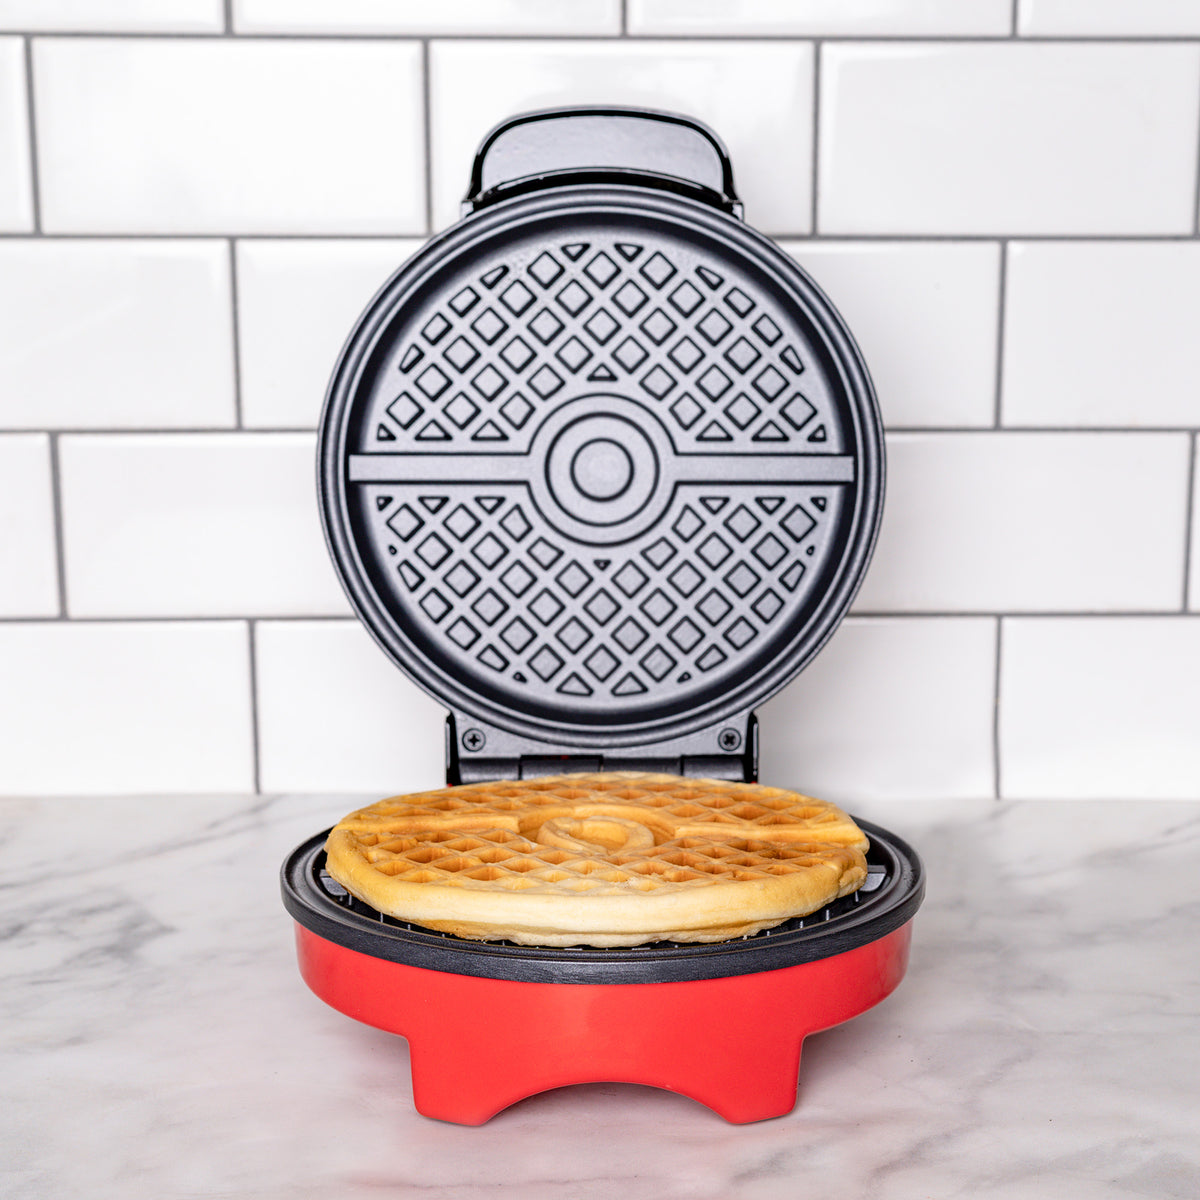 Pokémon Grilled Cheese Maker by Uncanny Brands